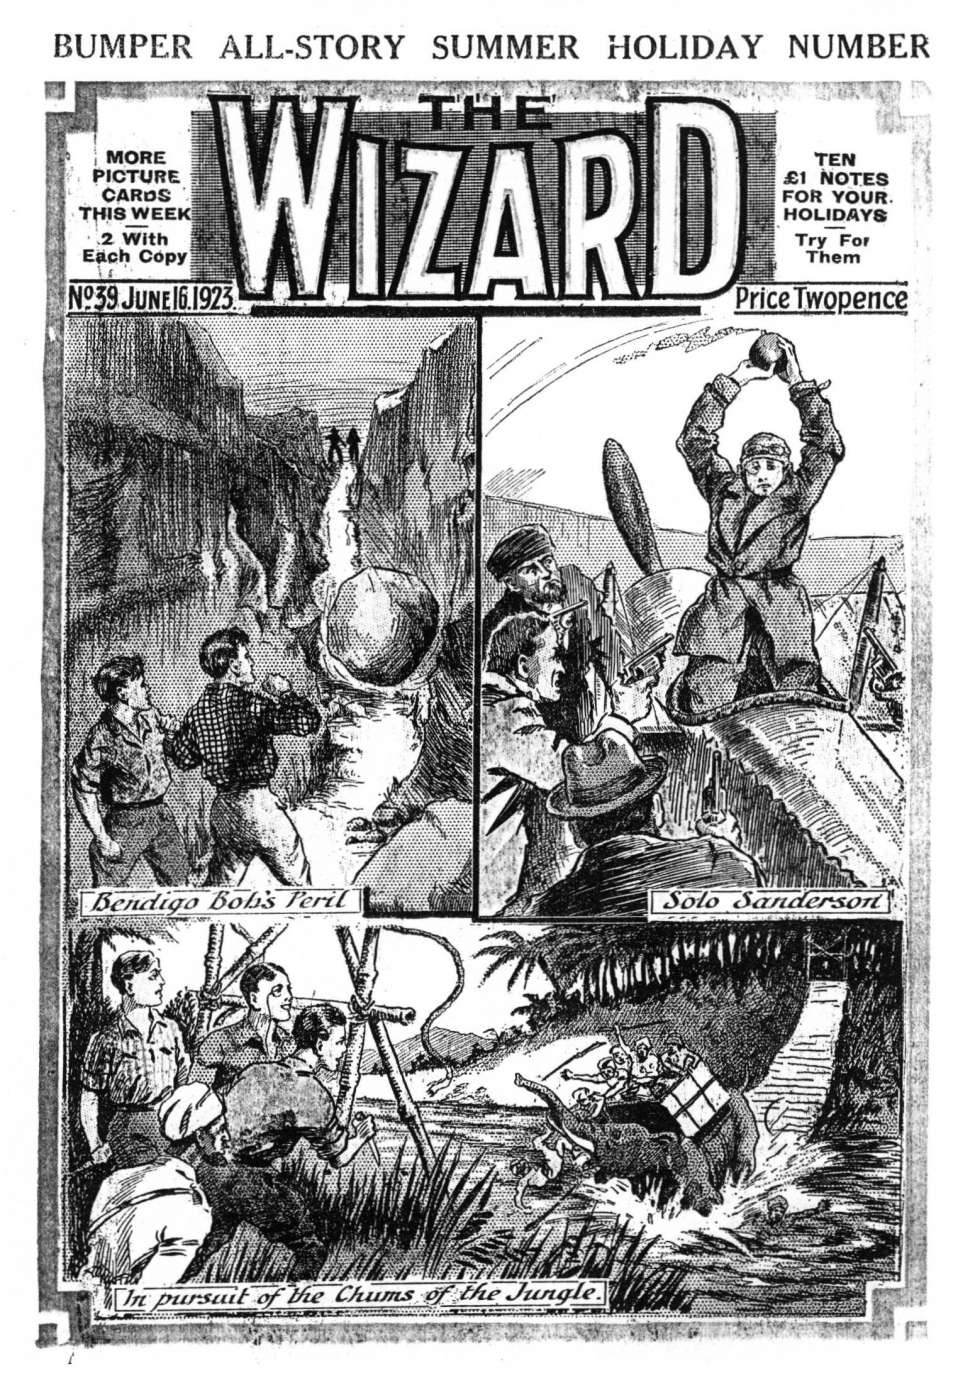 Book Cover For The Wizard 39